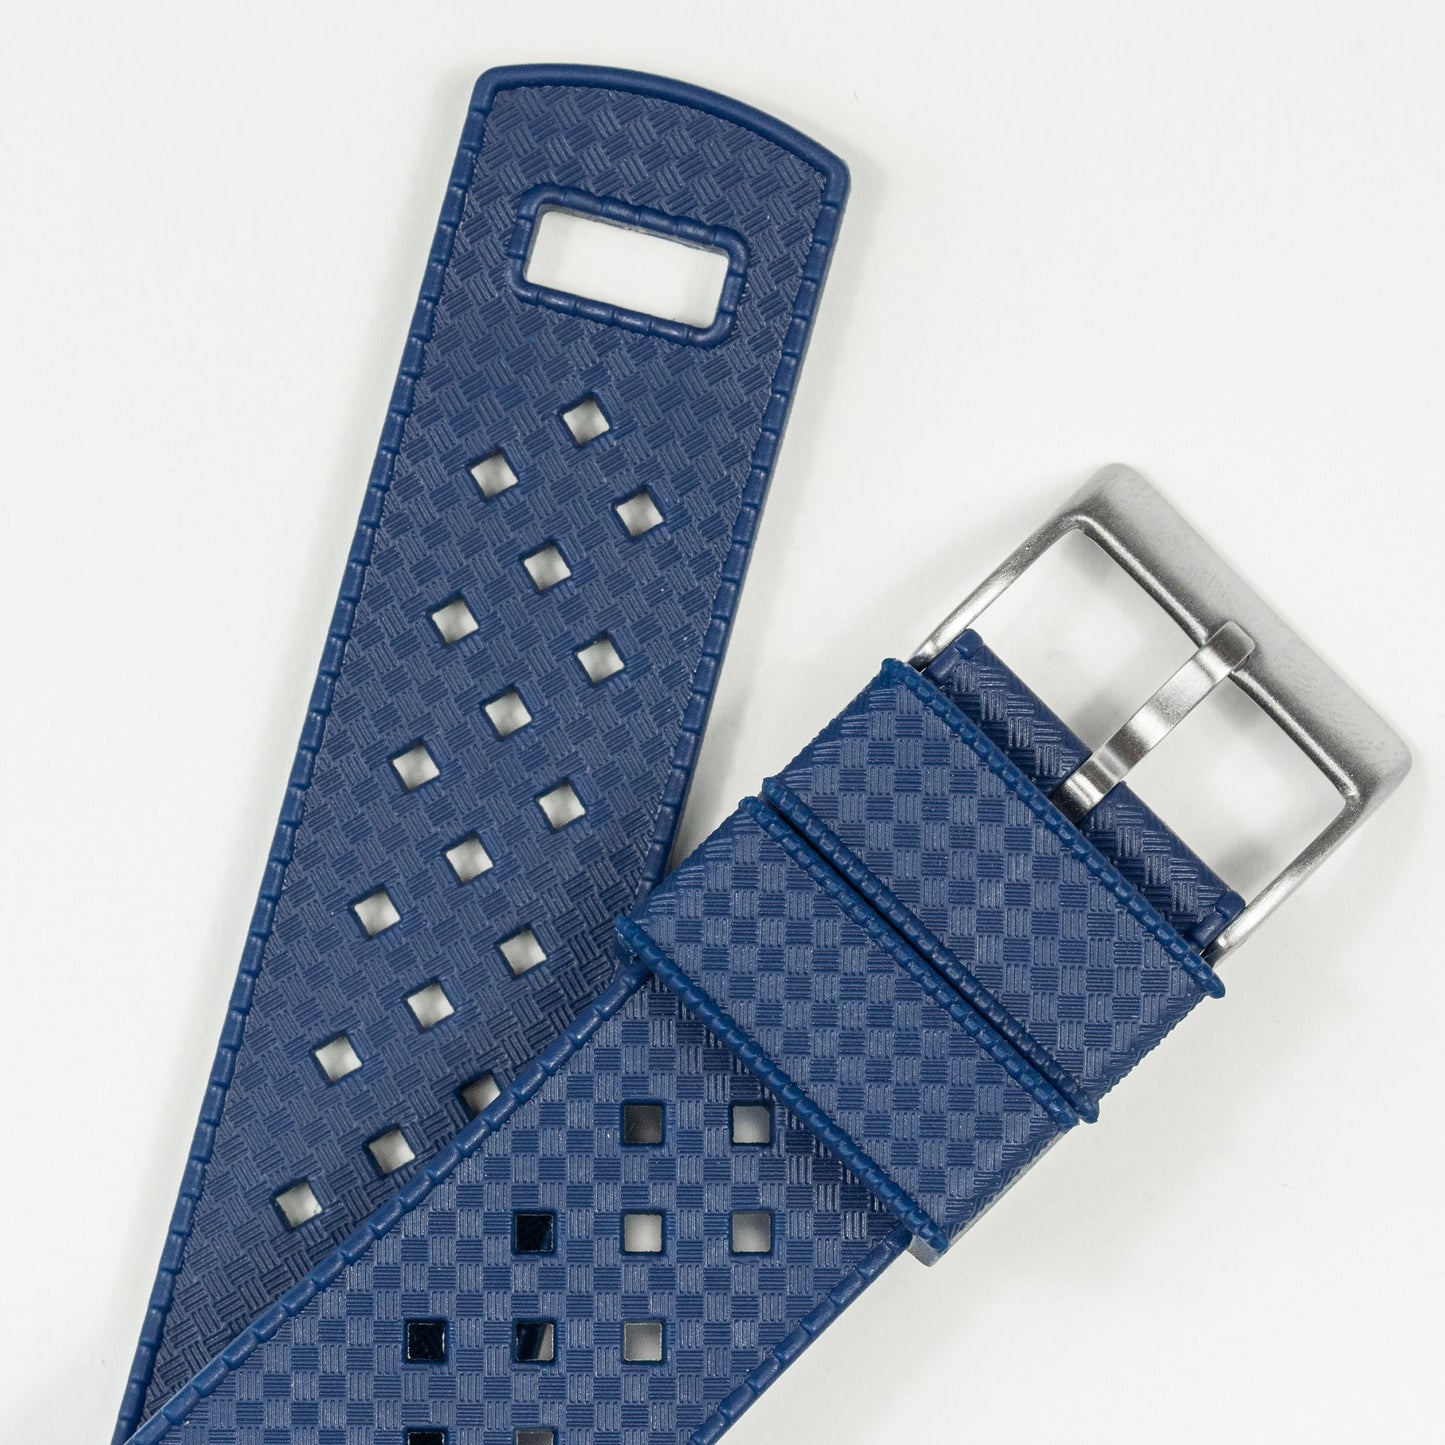 Fossil Q | Tropical-Style | Navy Blue - Barton Watch Bands